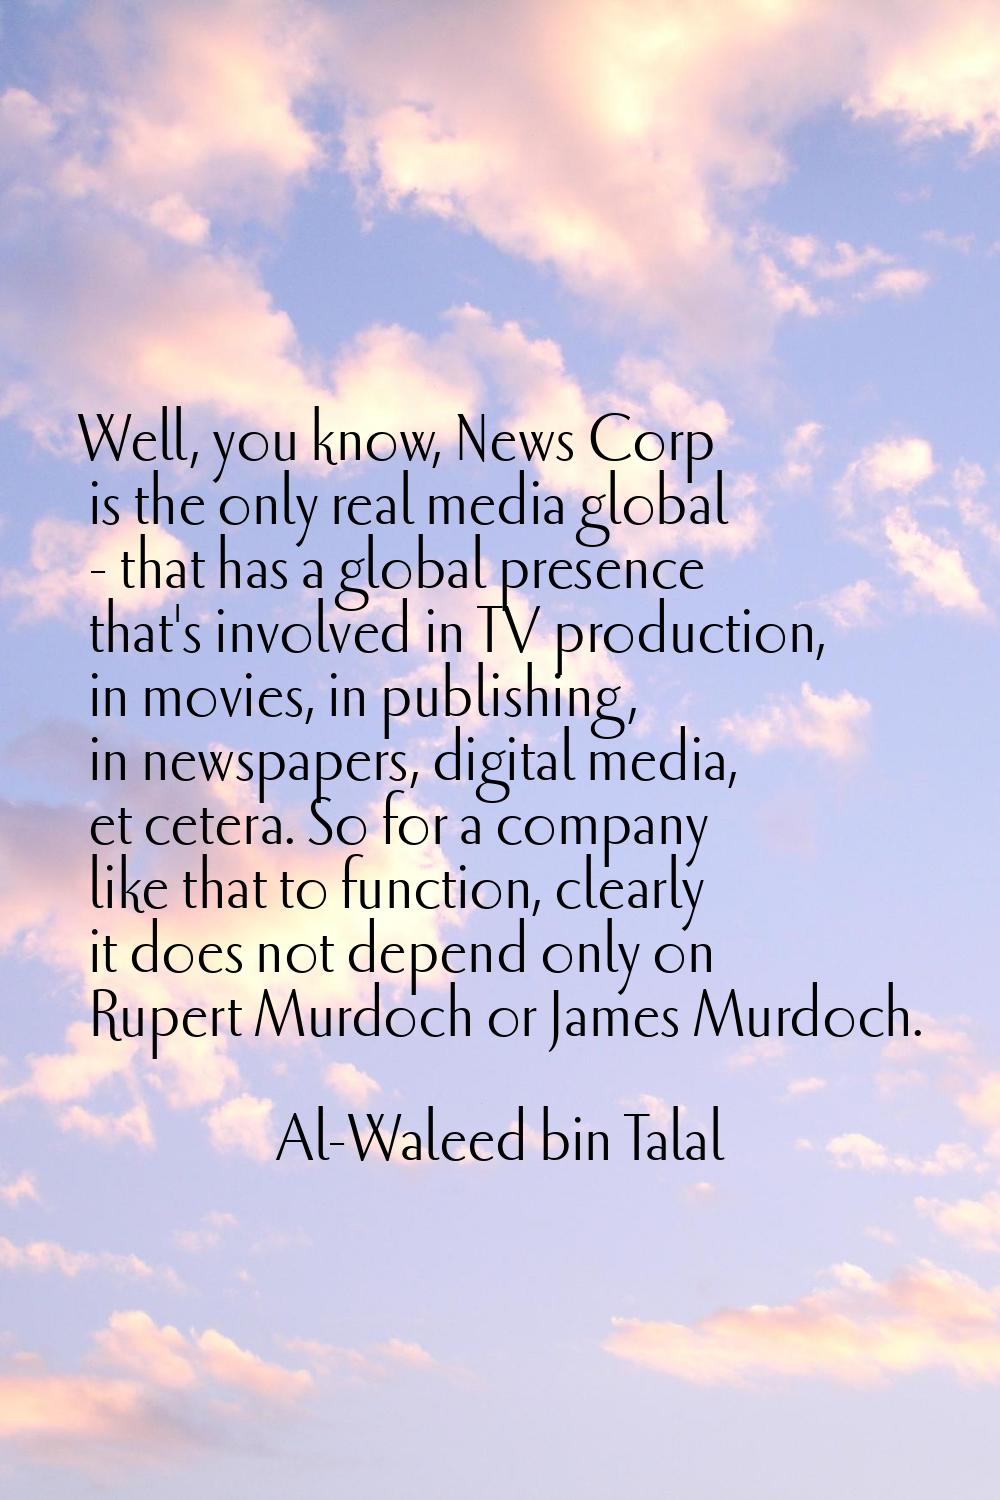 Well, you know, News Corp is the only real media global - that has a global presence that's involve